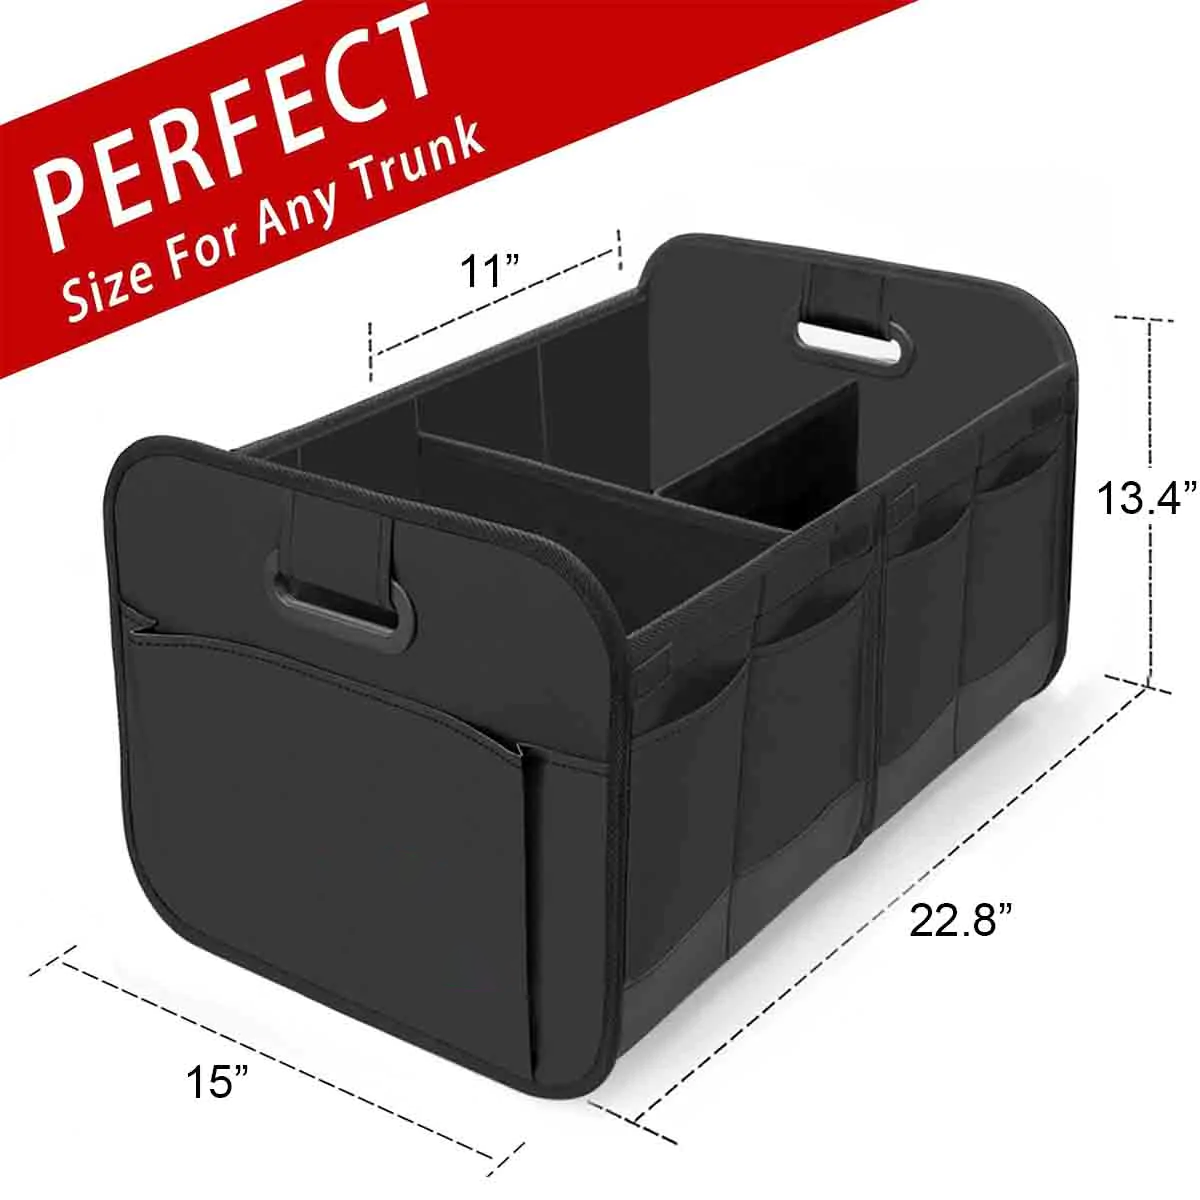 Custom Text For Car Trunk Organizer Storage, Compatible with All Cars, Reinforced Handles, Collapsible Multi, Compartment Car Organizers, Foldable and Waterproof, 600D Oxford Polyester HY12995